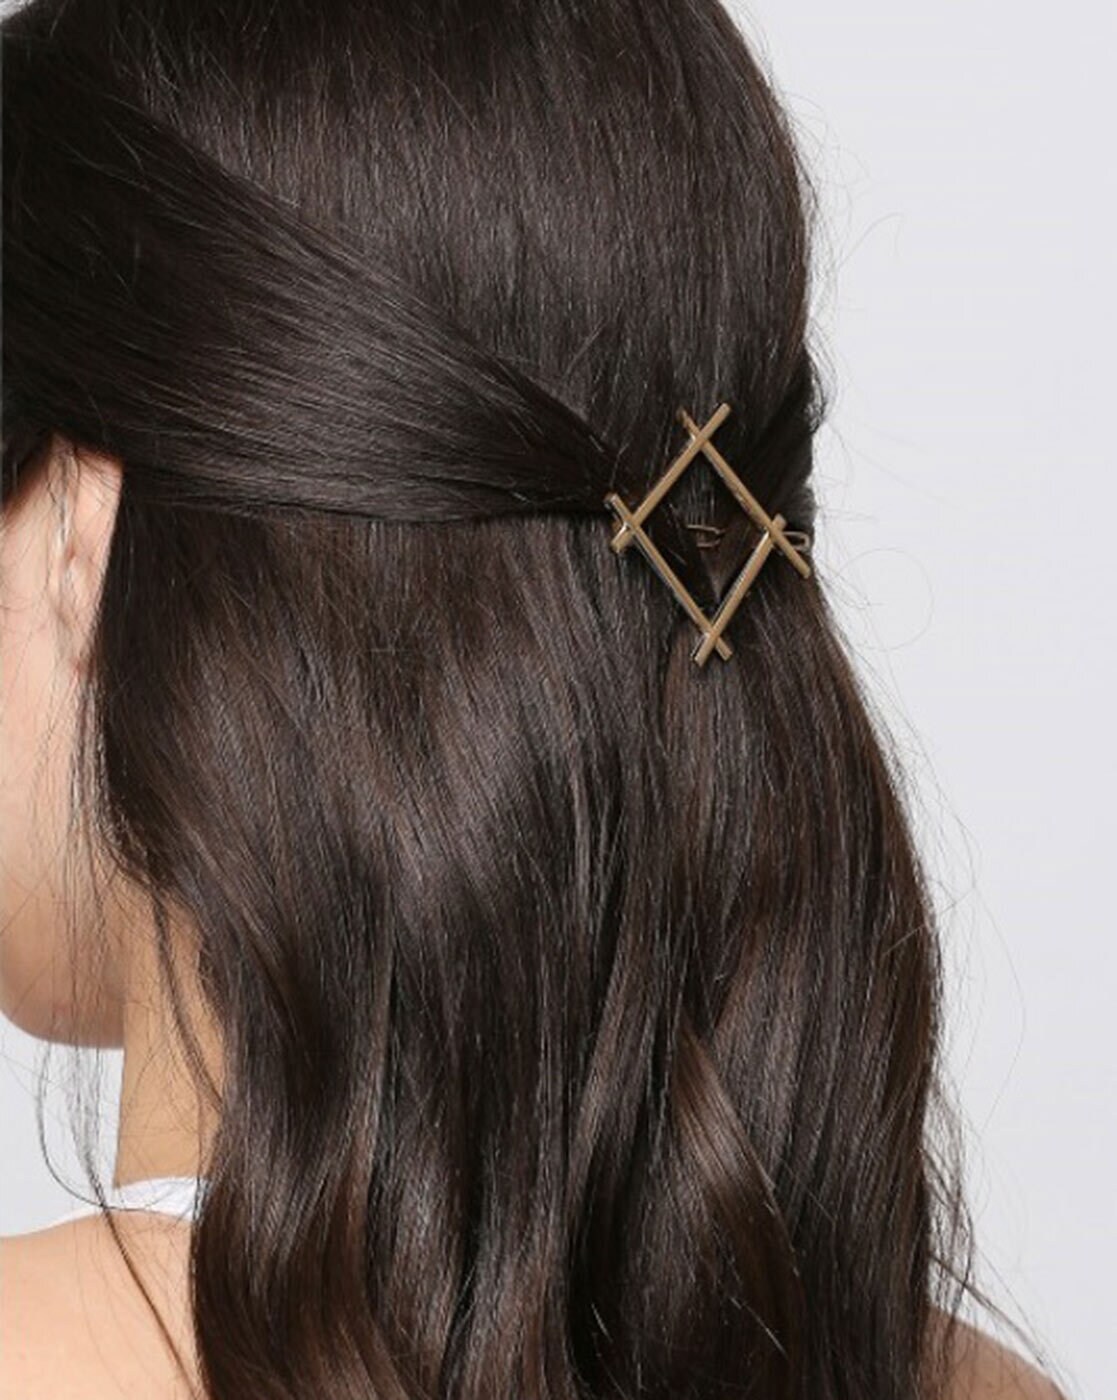 Buy Gold Hair Accessories for Women by Oomph Online 